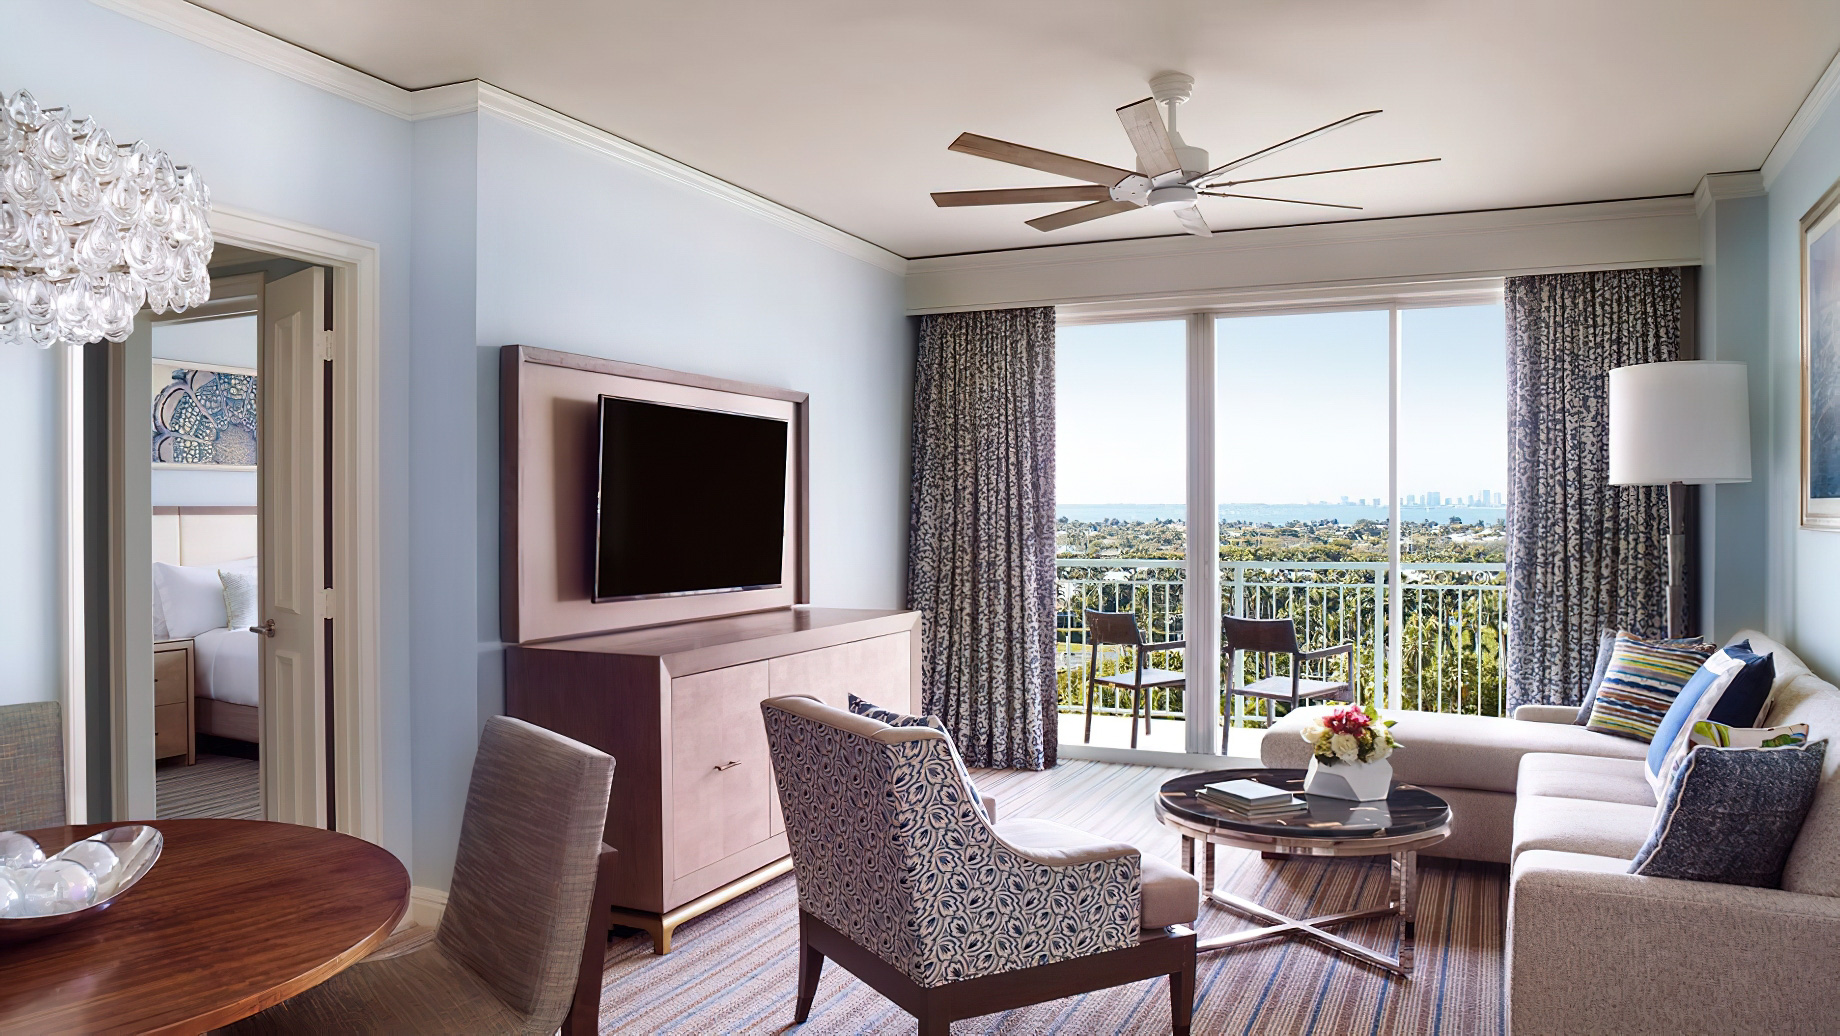 The Ritz-Carlton Key Biscayne, Miami Hotel – Miami, FL, USA – One Bedroom Resort View Residential Suite